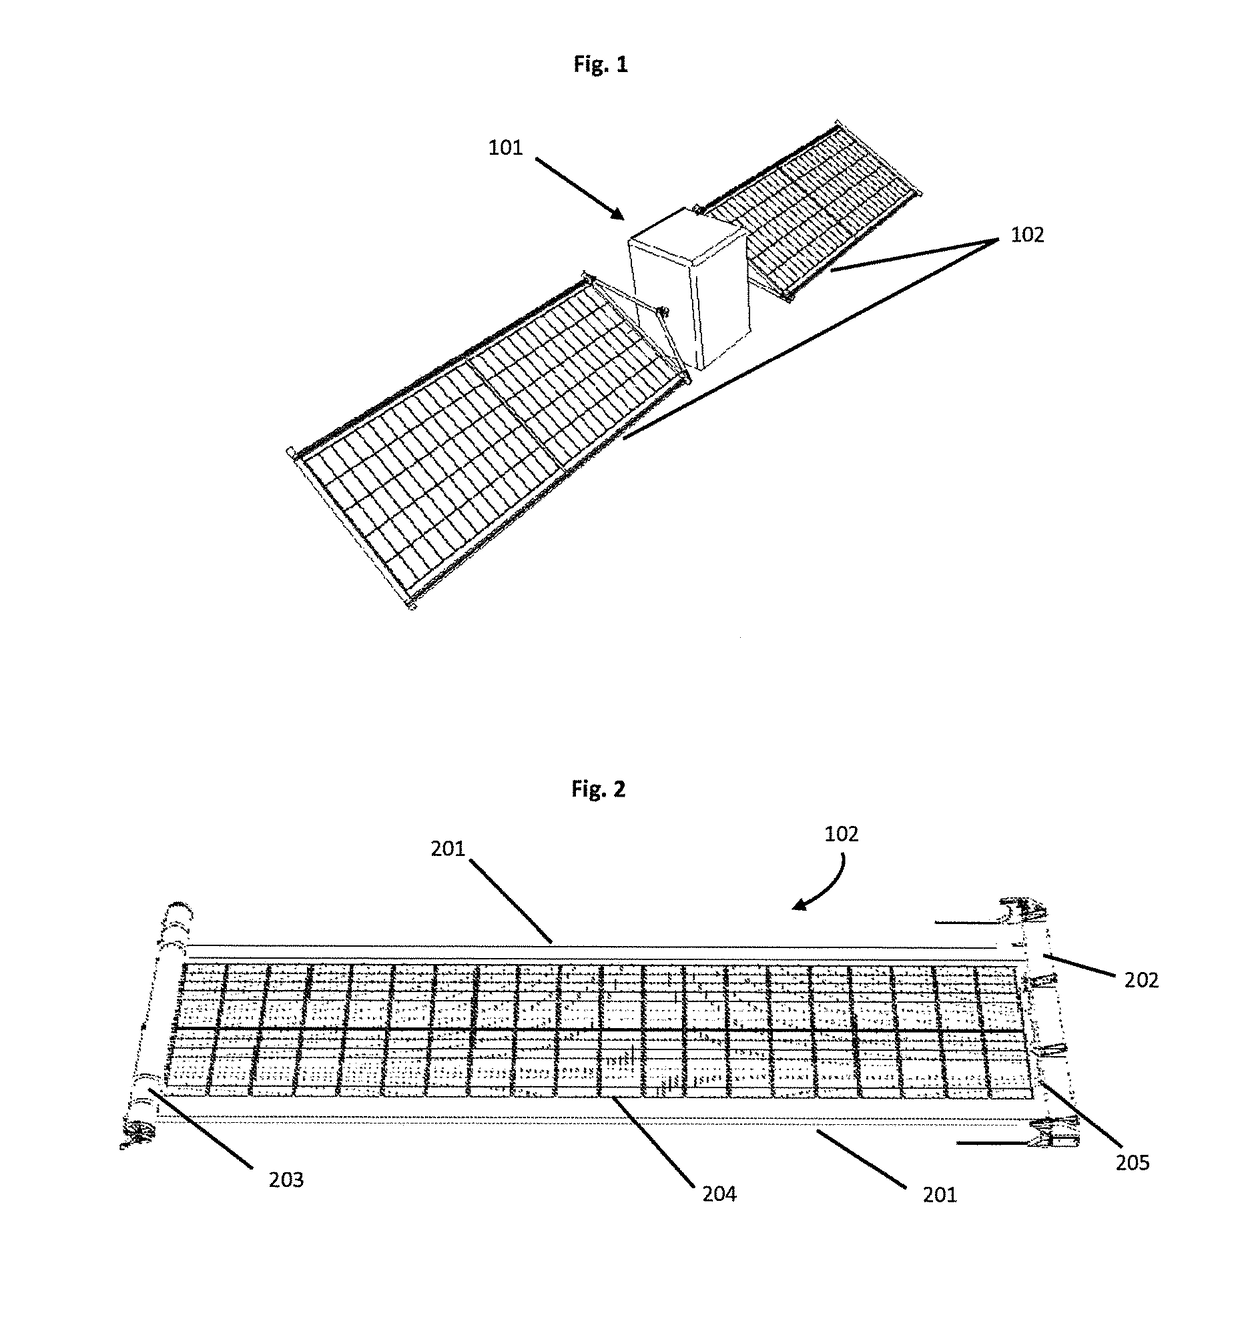 Directionally controlled elastically deployable roll-out solar array